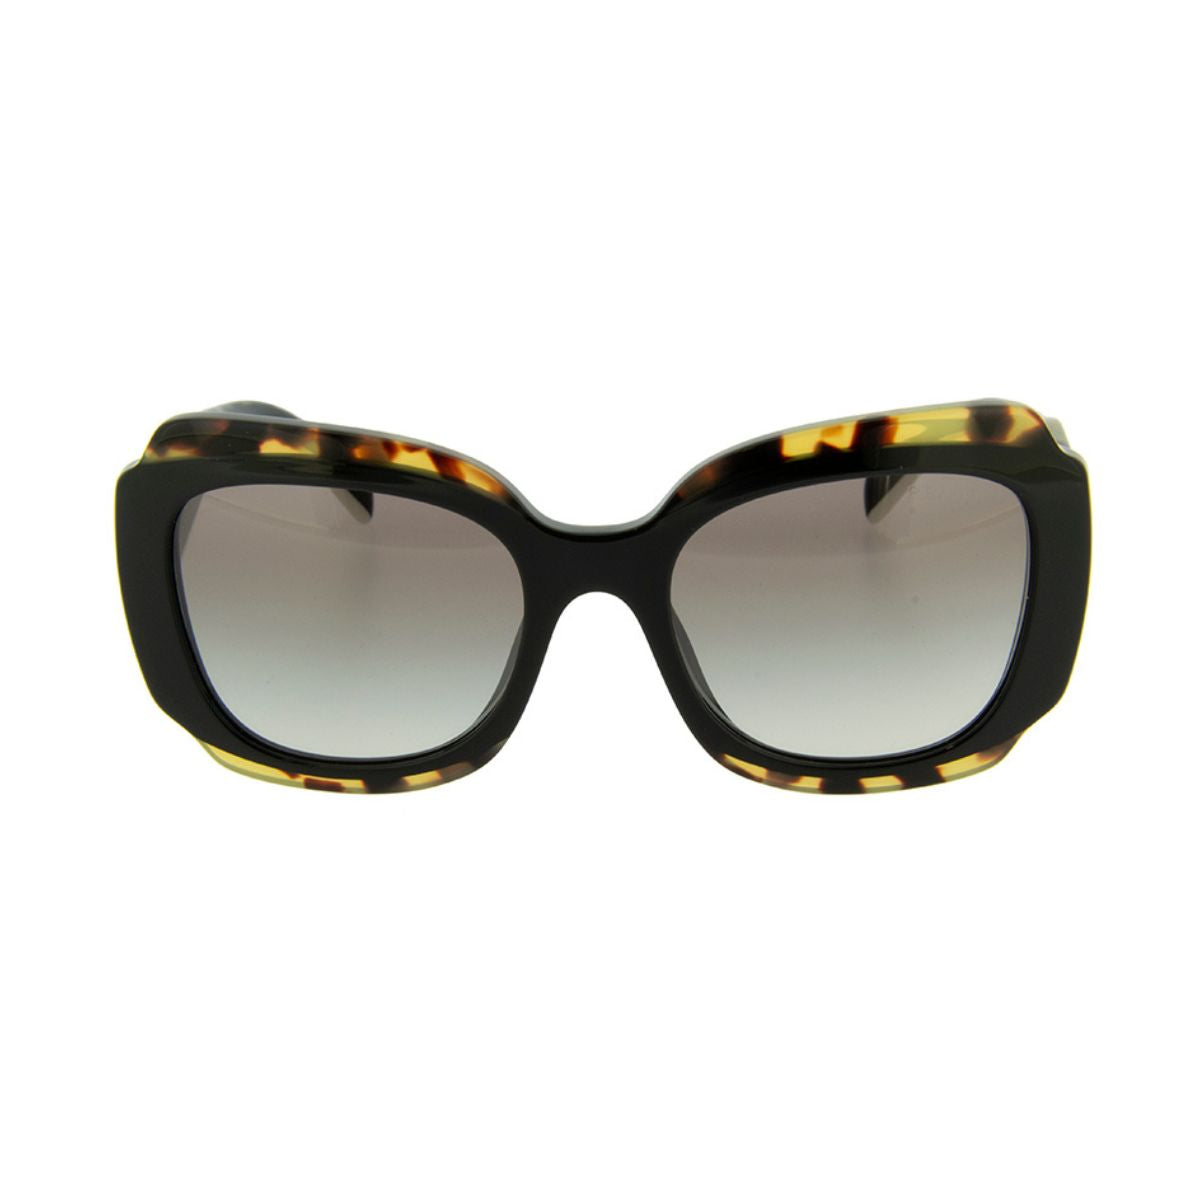  "Elevate your style with Prada SPR16Y 01M-OA7 sunglasses for women from Optorium, offering a chic butterfly shape design and high-quality shades in cool grey, perfect for female fashion enthusiasts."